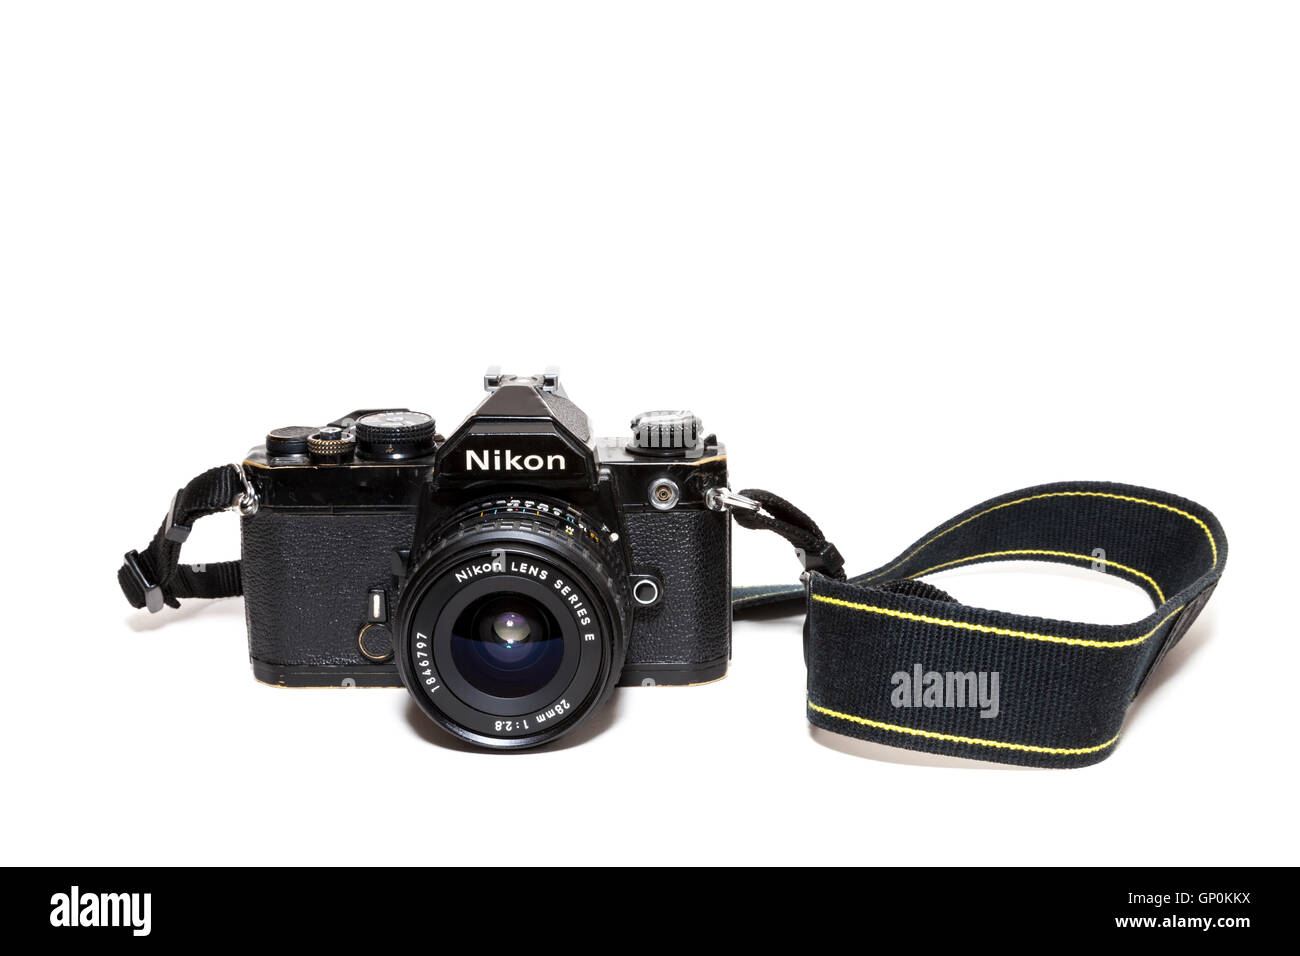 Nikon FM. An old 35mm Nikon SLR camera for film with strap attached Stock Photo